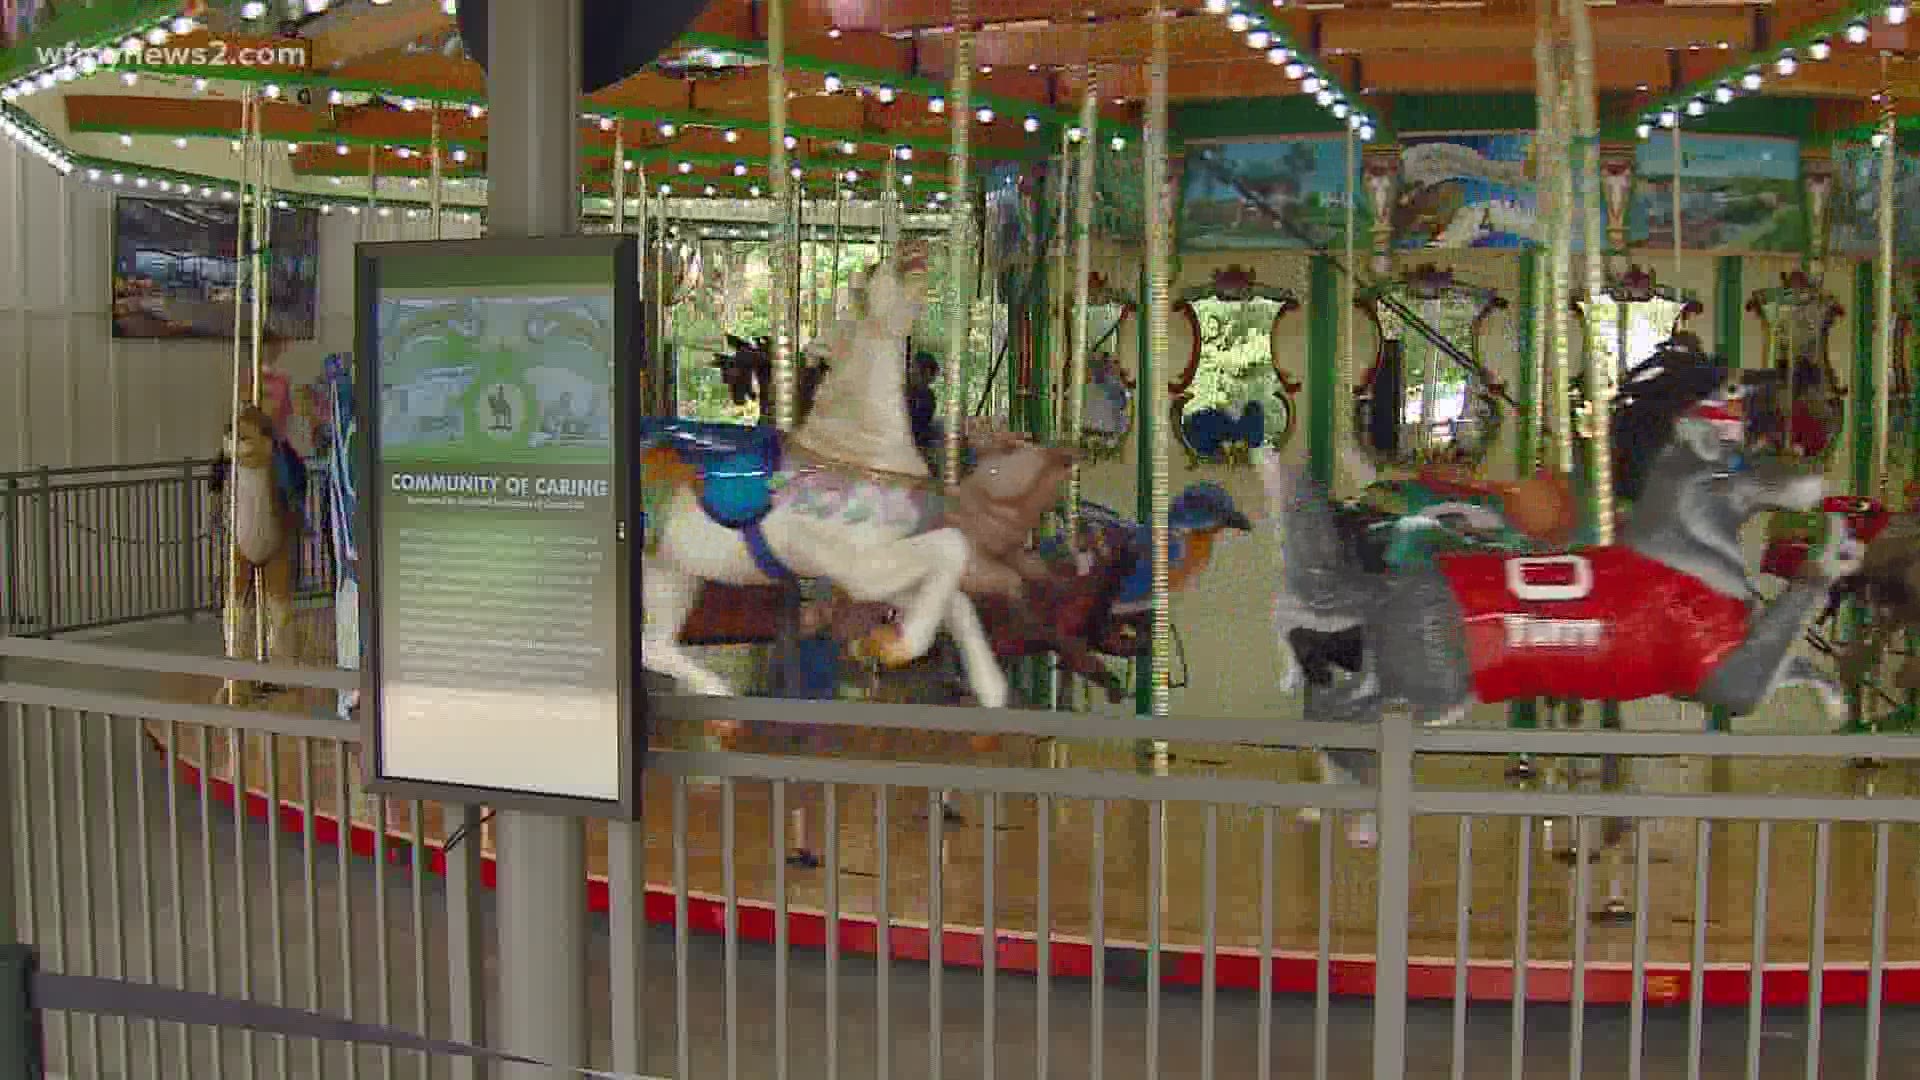 The Rotary Club’s carousel at the science center is officially open. The carousel has 56 different hand-painted figures.